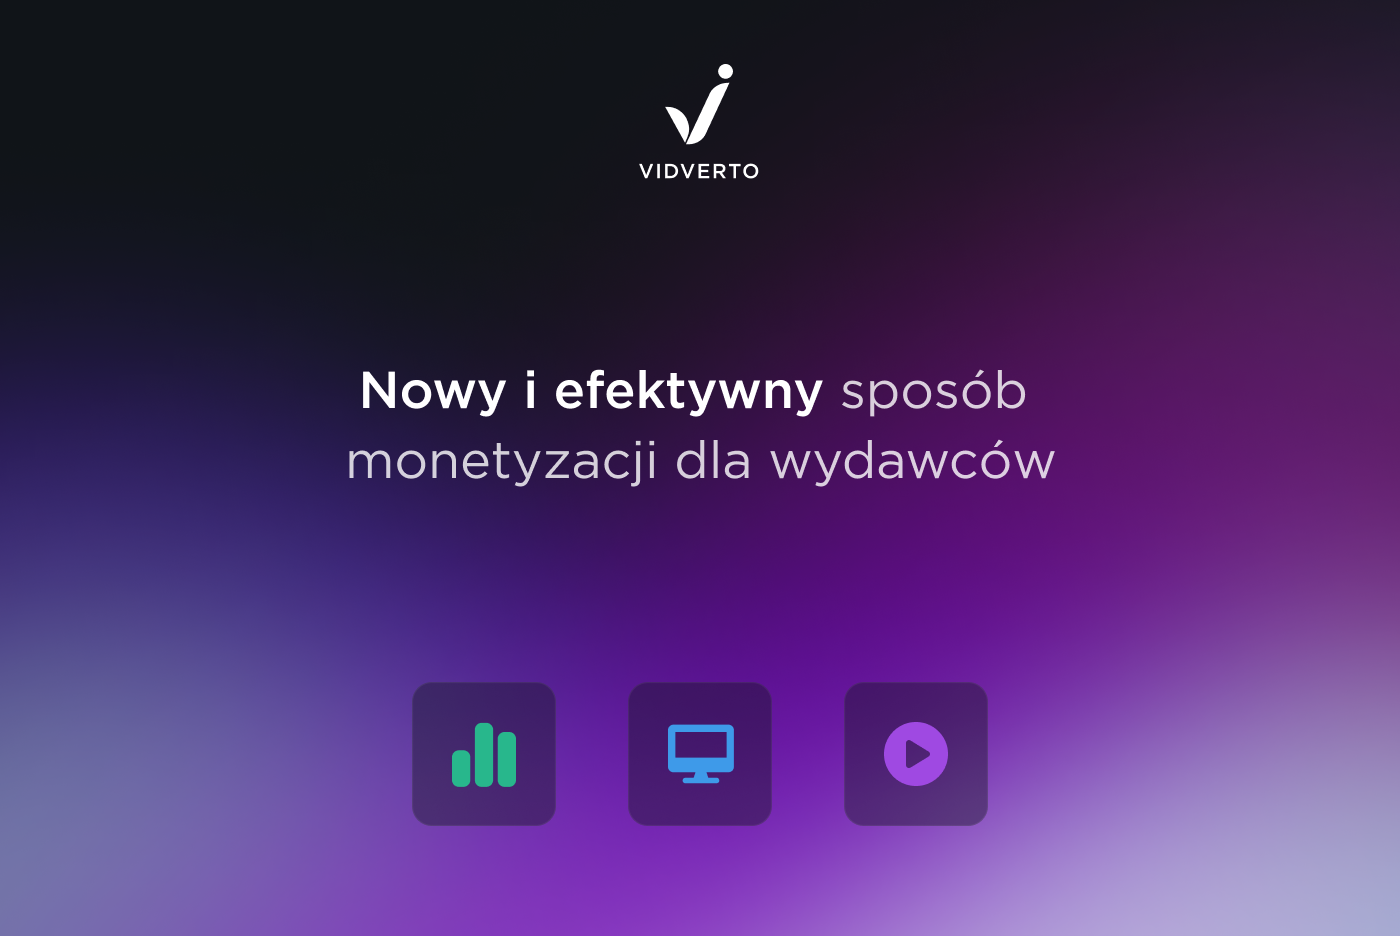 Vidverto ­– new and effective way of monetization for publishers